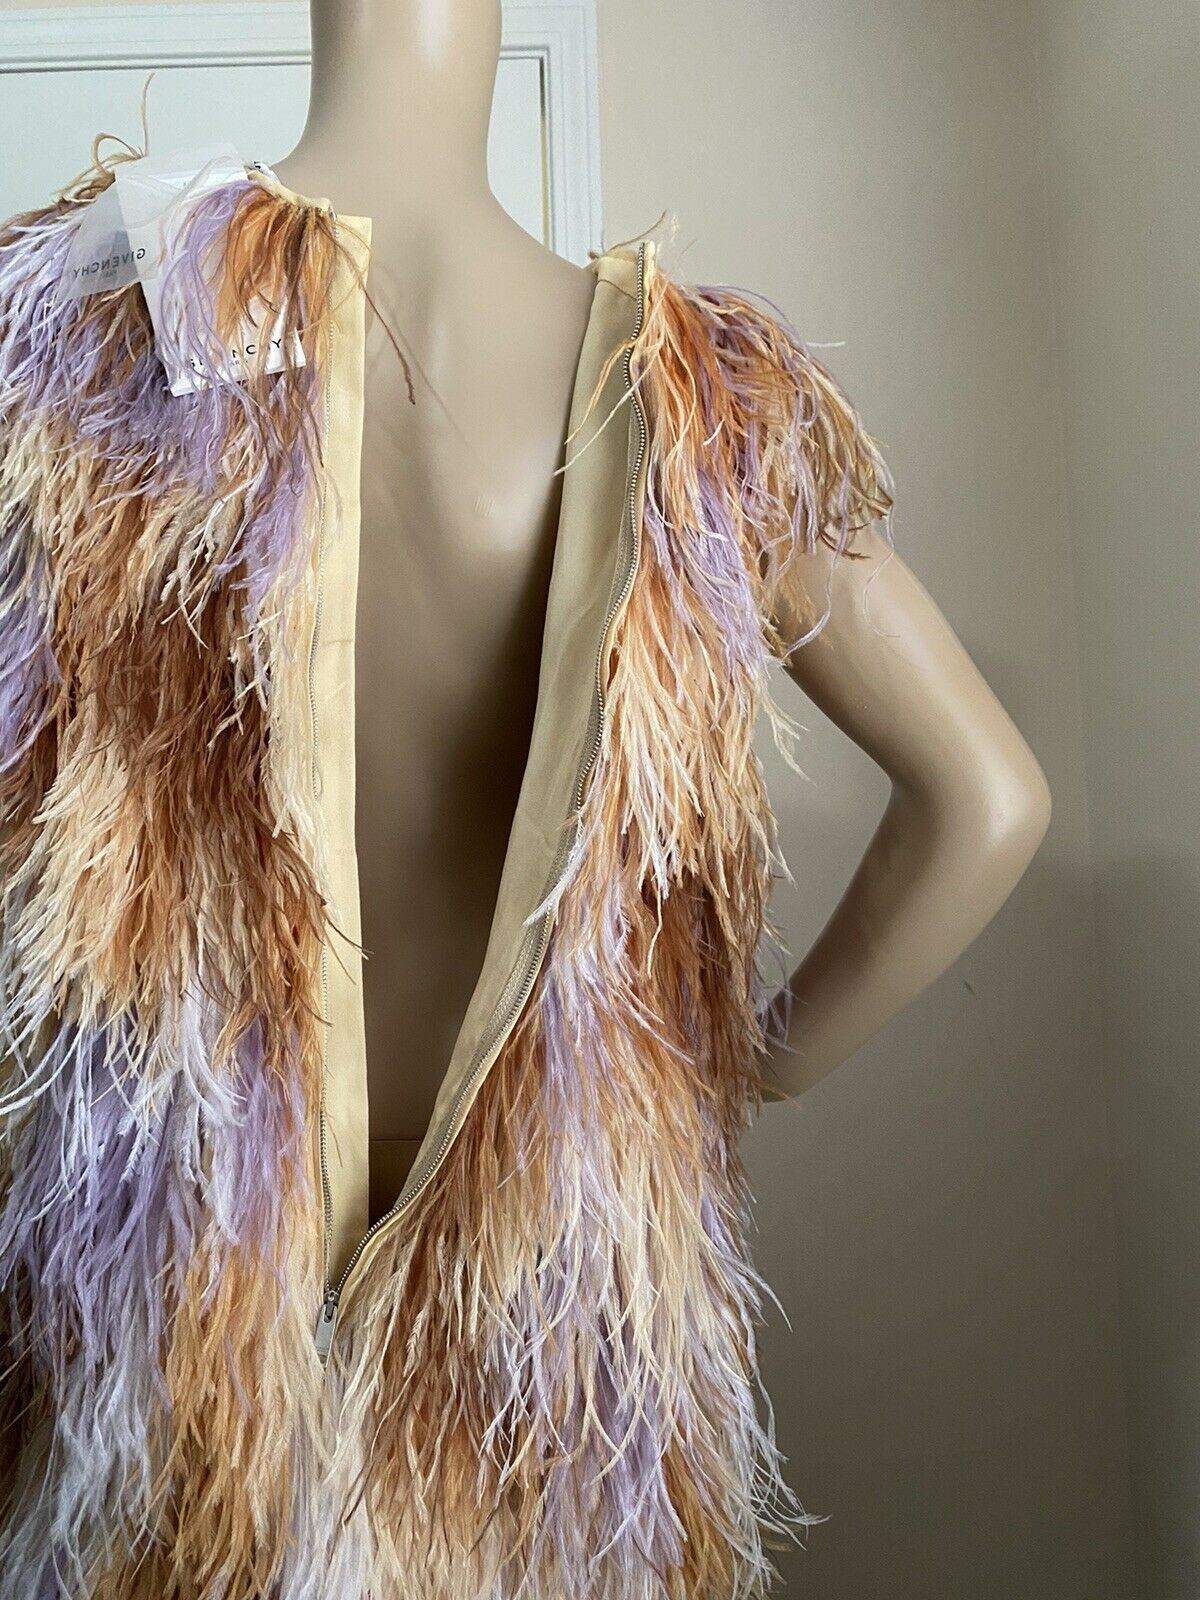 New $13375 Givenchy Ostrich Feather Sleeveless Dress DK Beige 8 US/42 It Italy